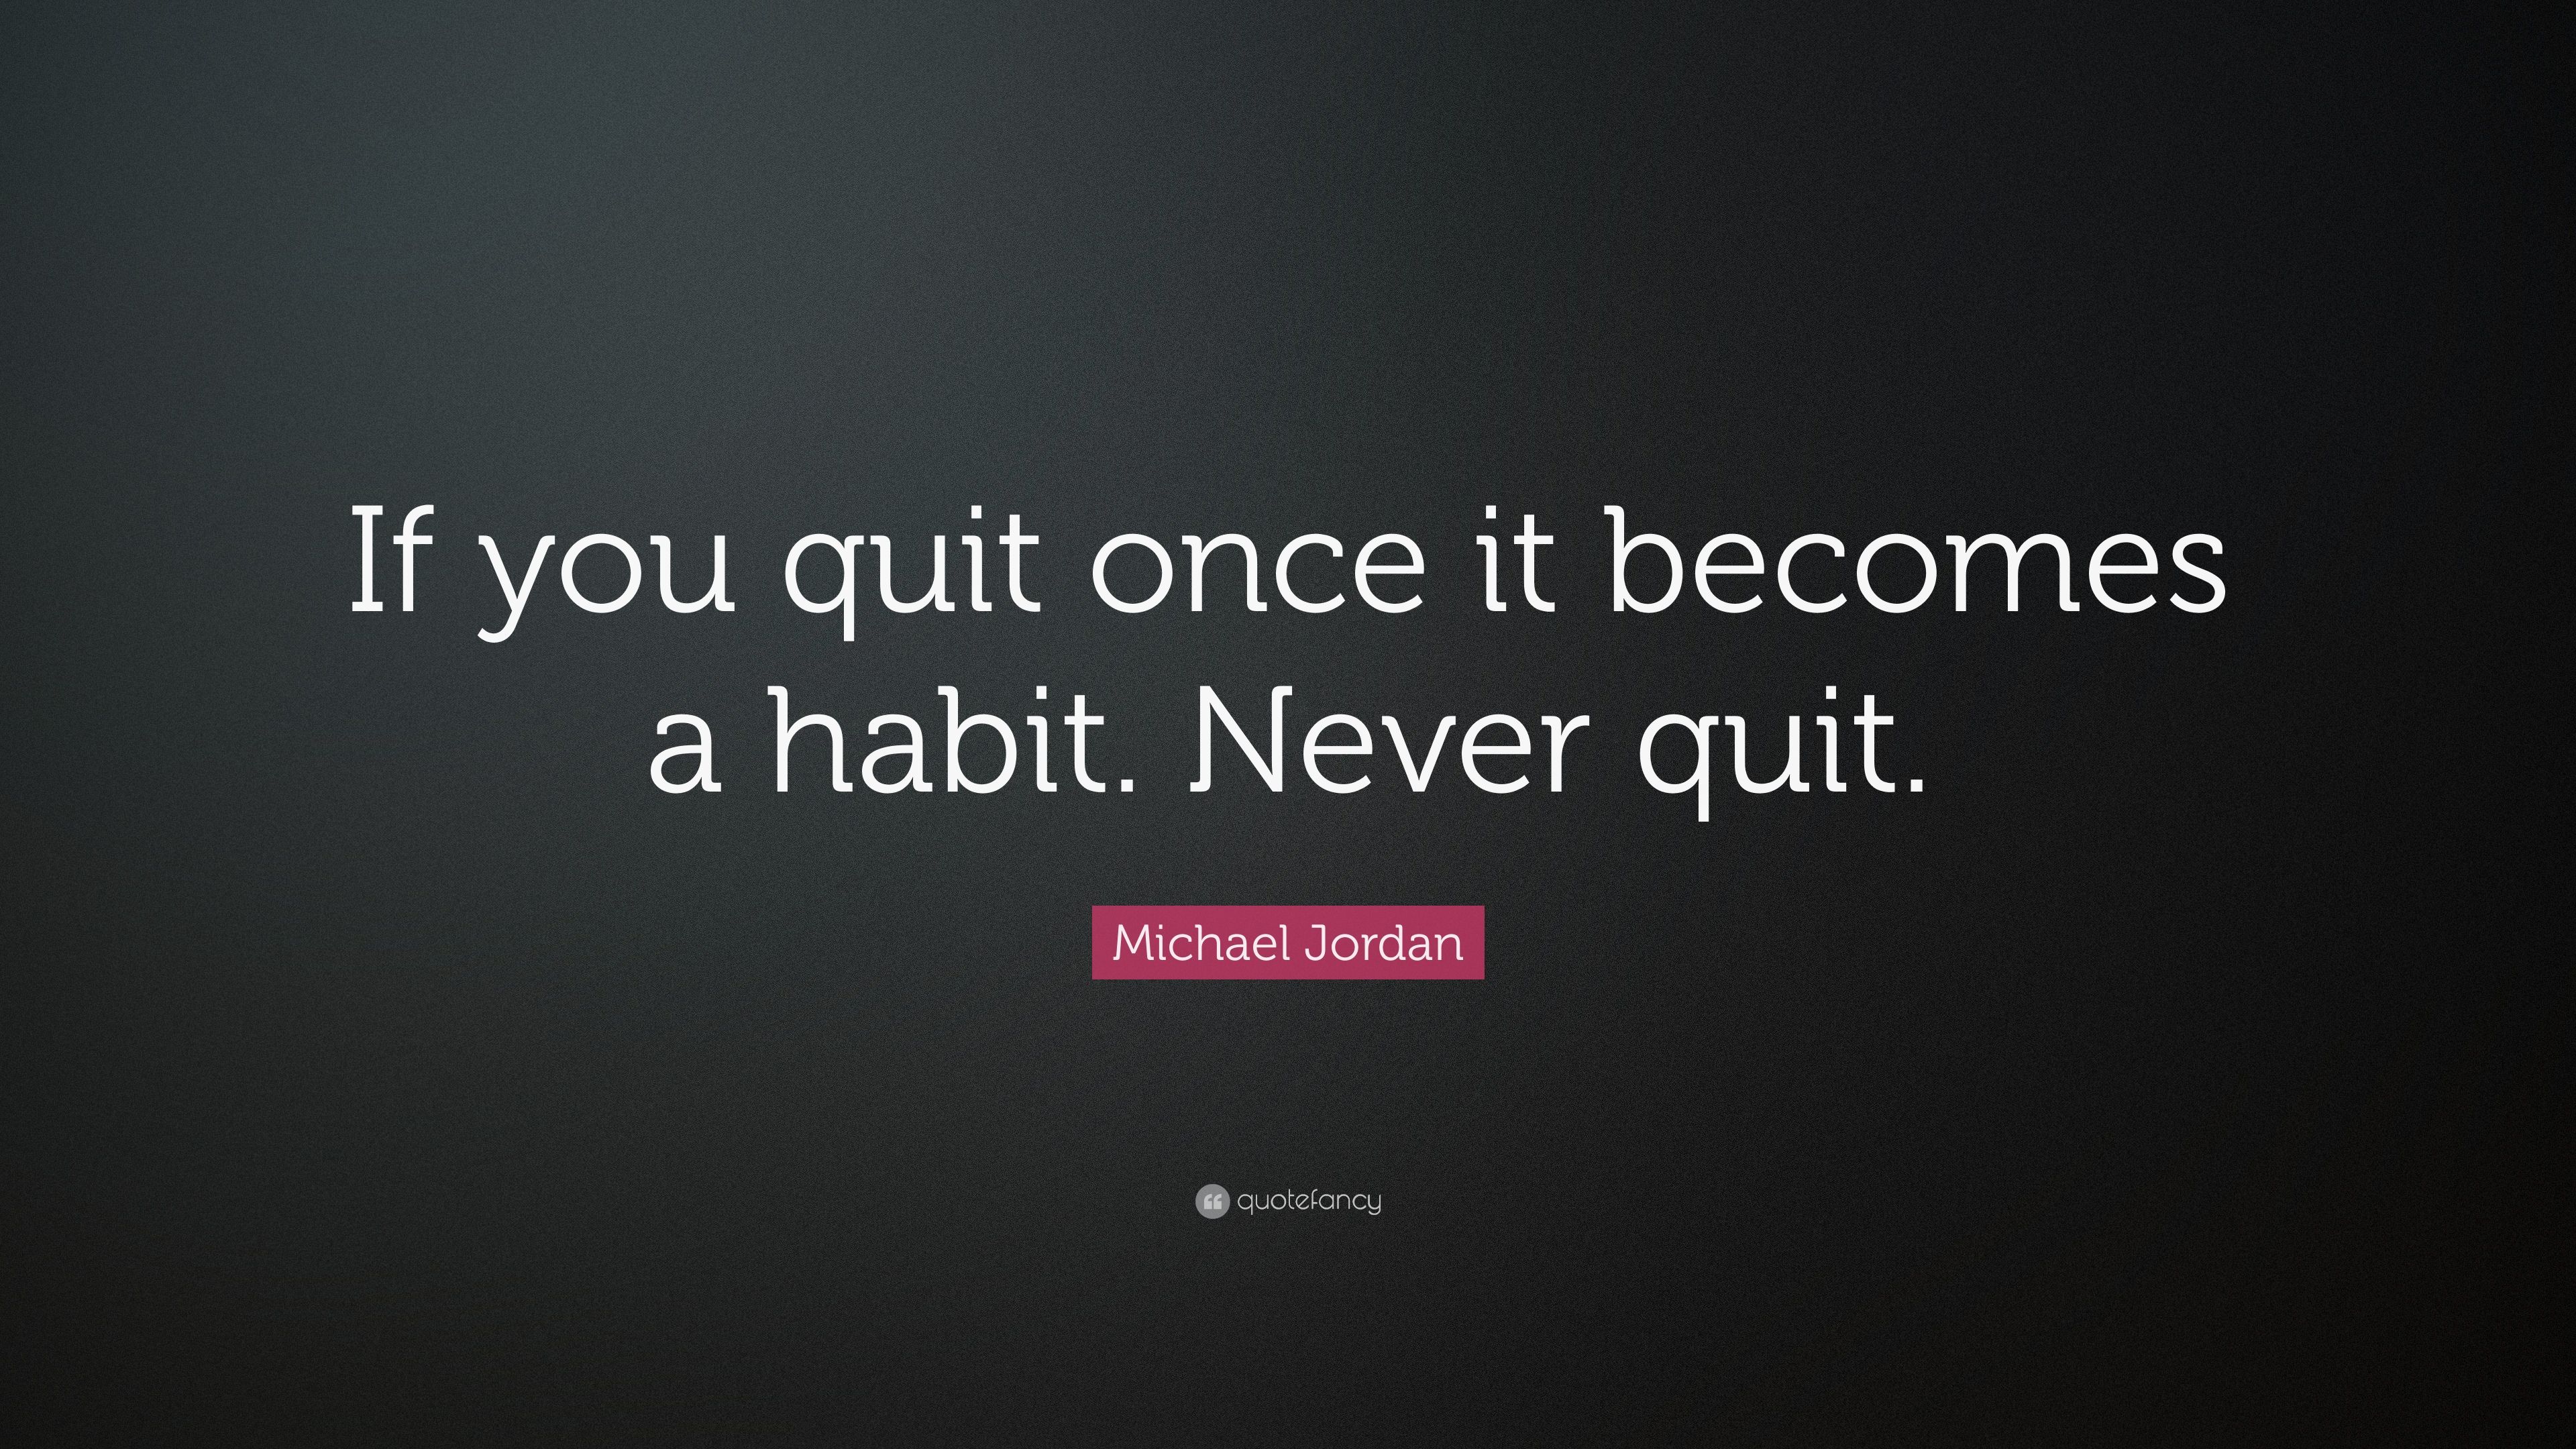 Michael Jordan Quote: “If you quit once it becomes a habit. Never